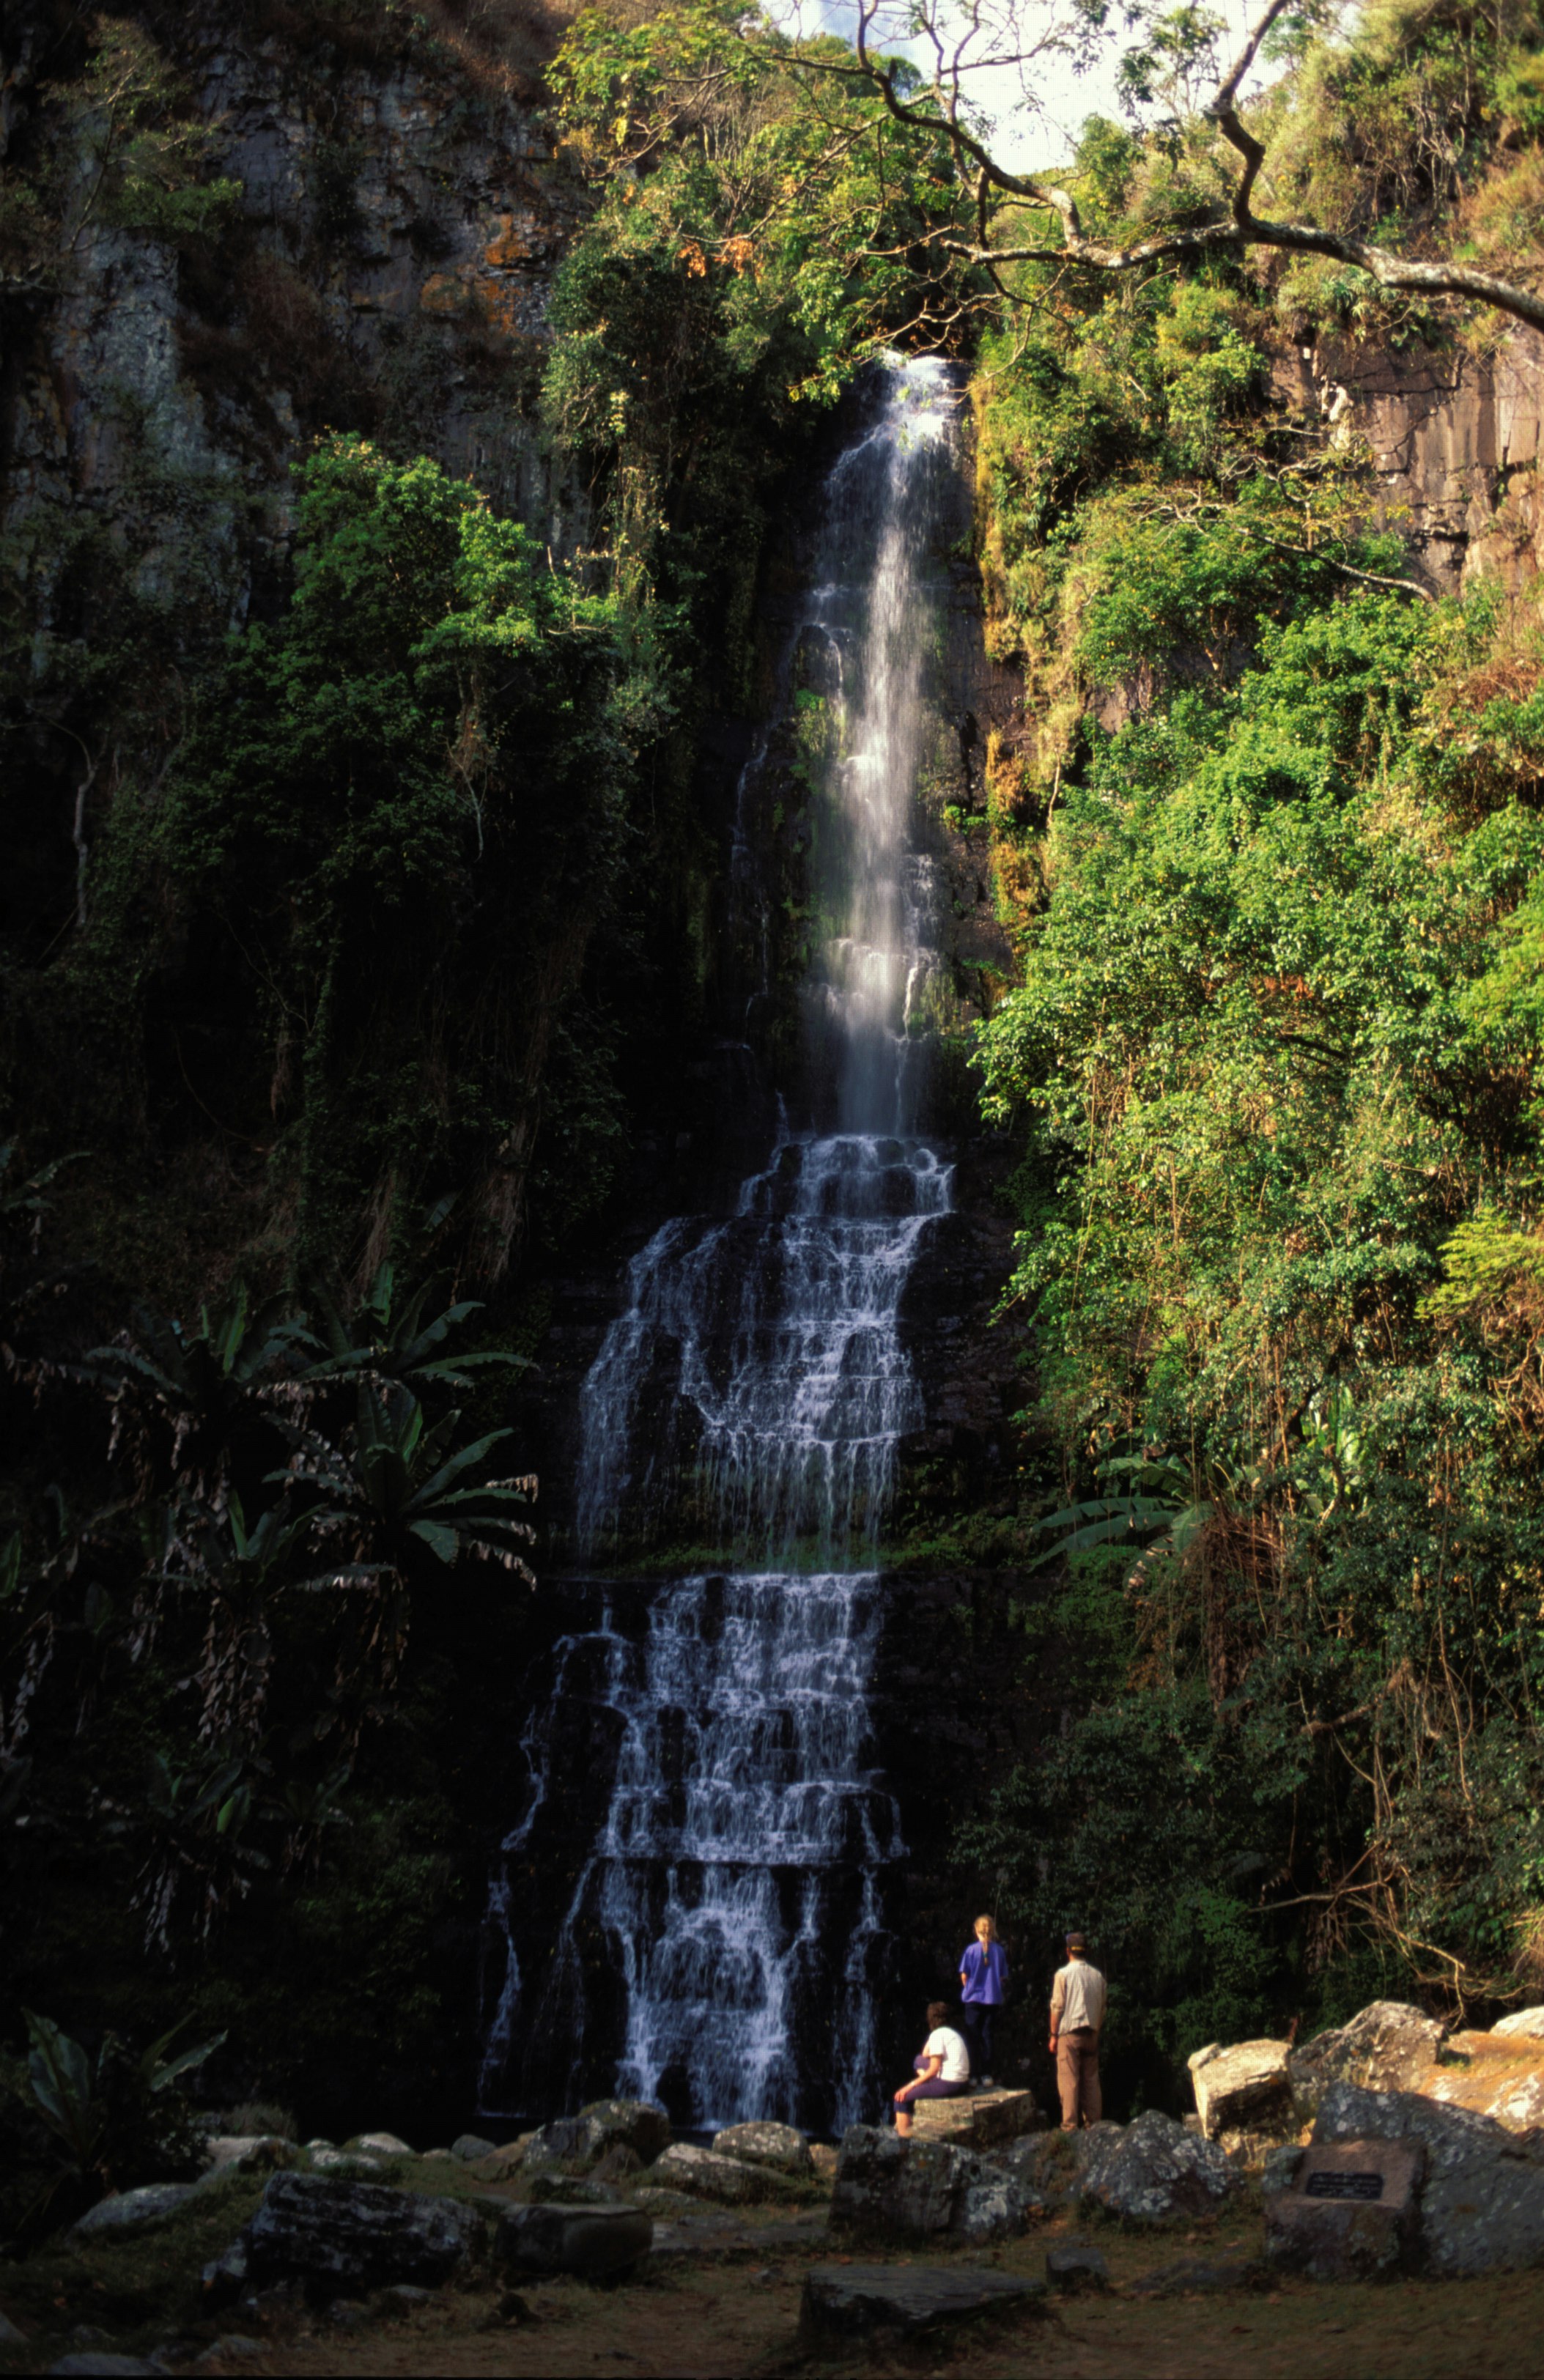 Three trekkers stand on rocks at the base of a narrow, but dramatic waterfall; the cascade is surrounded by lush forest.